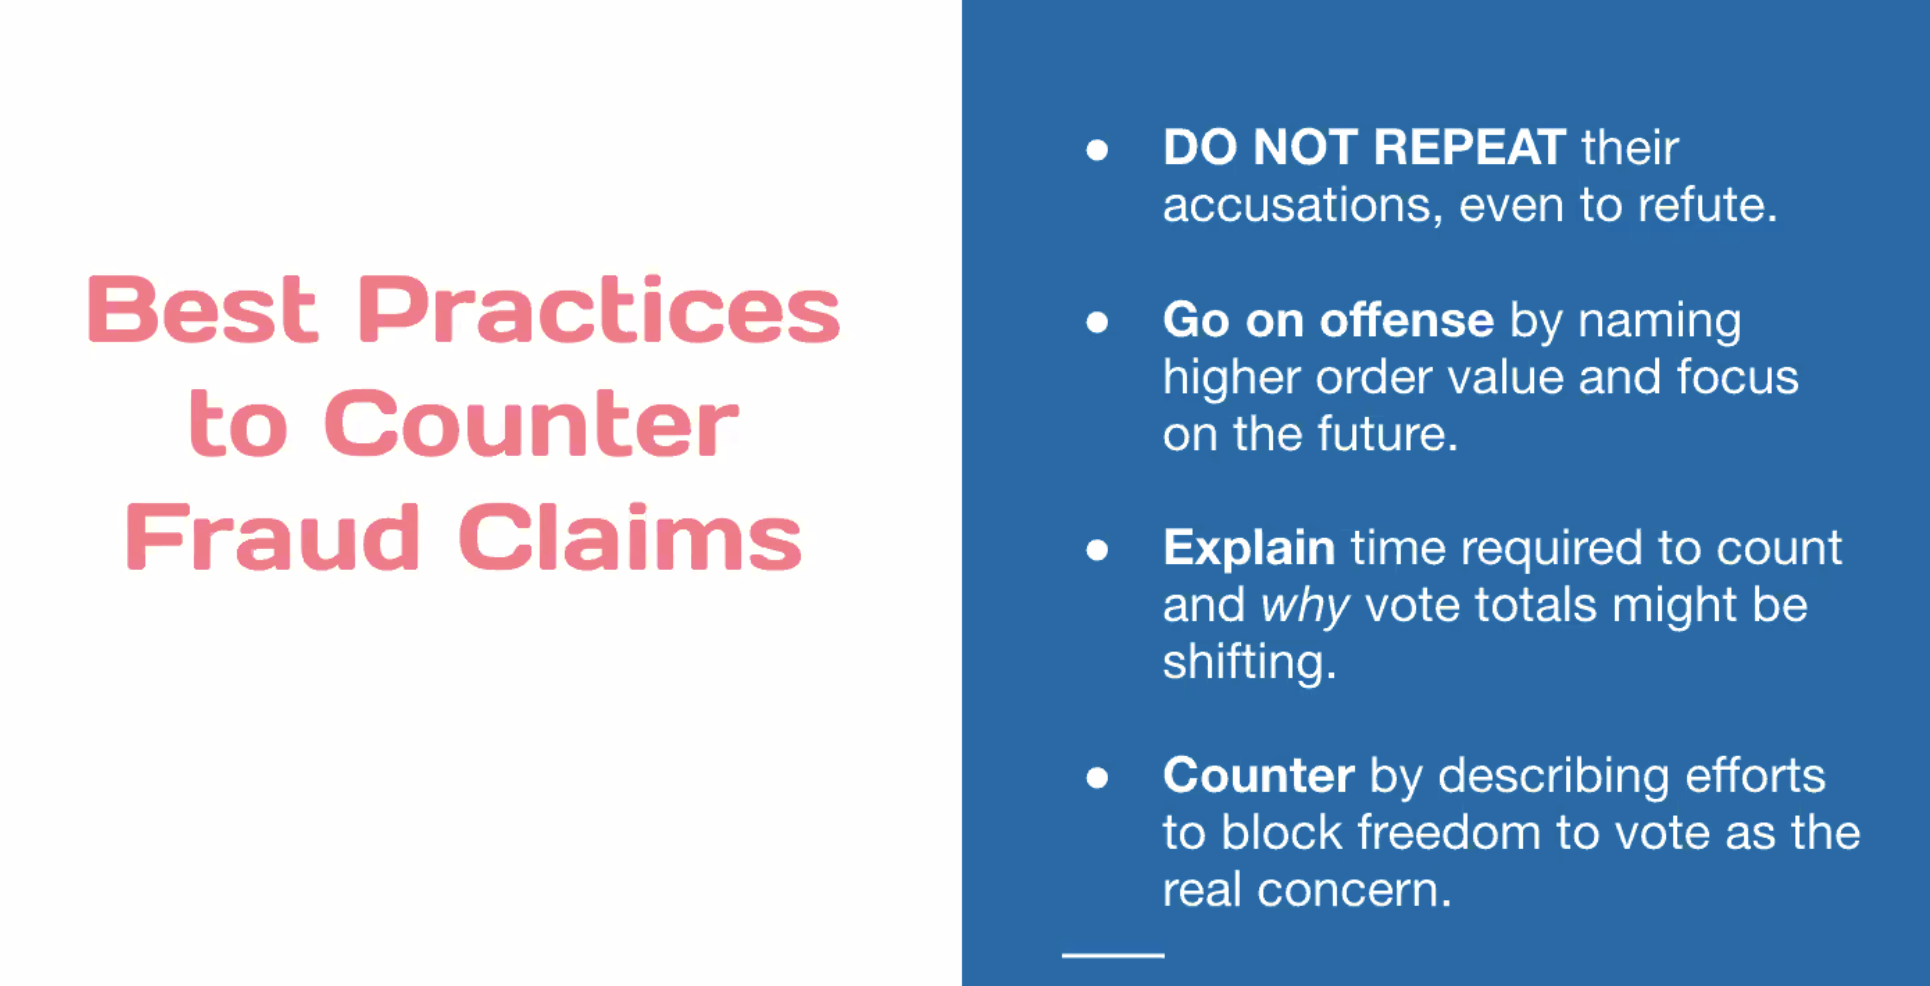 Best practices to counter fraud claims